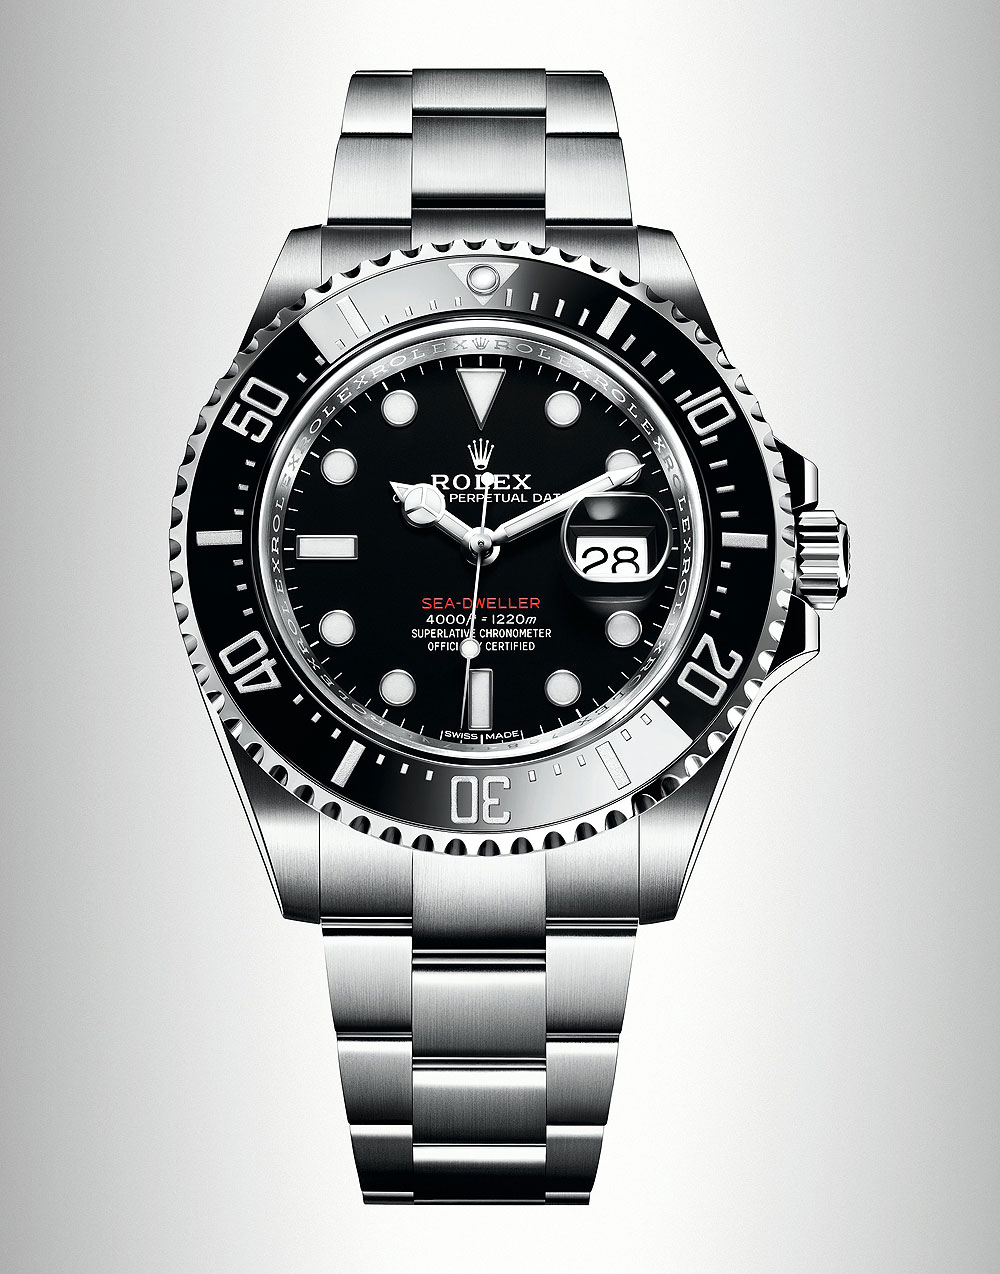 Rolex Sea-Dweller Resurfaces with Case and New | WatchTime - USA's No.1 Watch